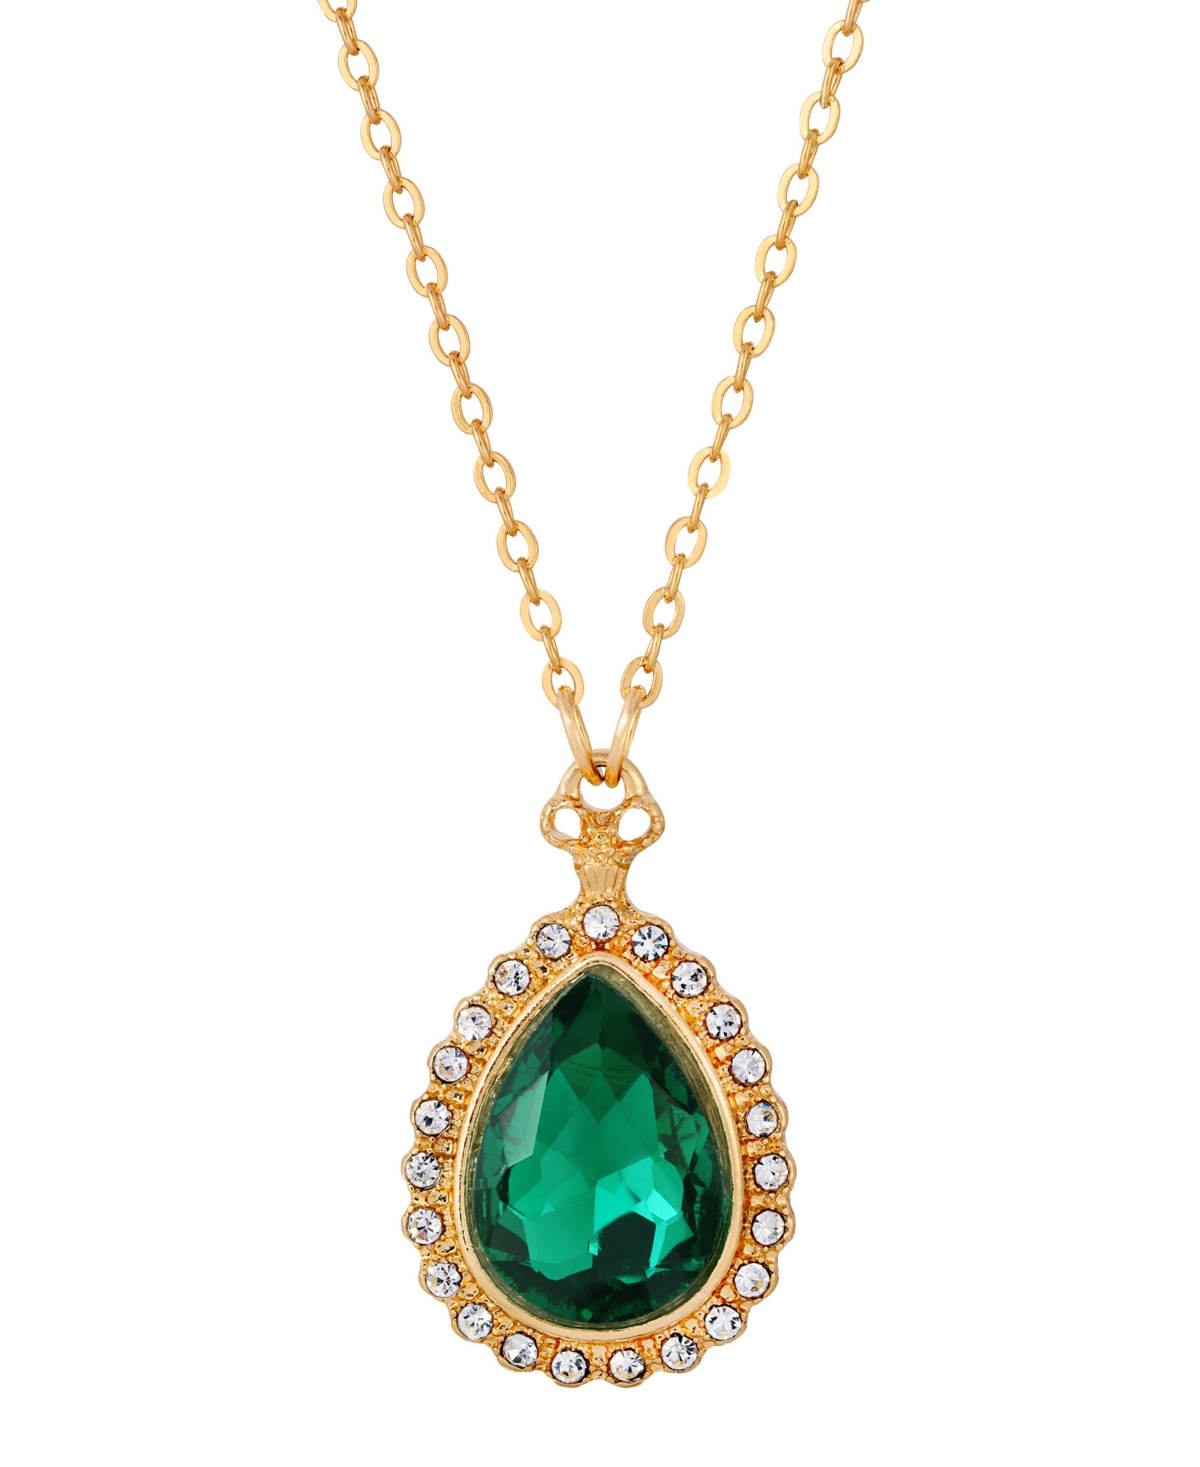 Victorian Costume Jewelry to Wear with Your Dress 2028 Teardrop Necklace - Green $21.00 AT vintagedancer.com